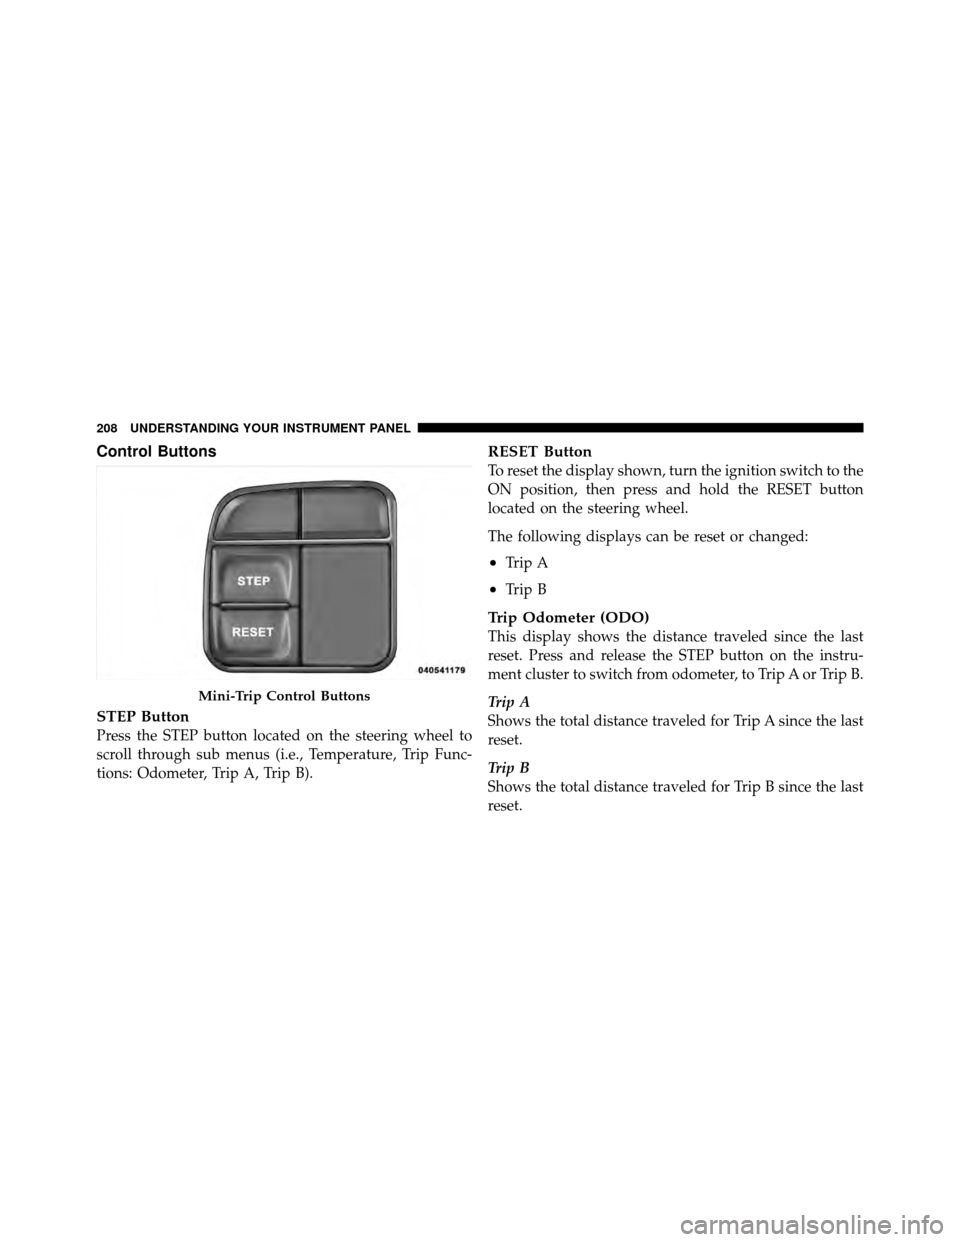 CHRYSLER 200 2012 1.G Owners Manual Control Buttons
STEP Button
Press the STEP button located on the steering wheel to
scroll through sub menus (i.e., Temperature, Trip Func-
tions: Odometer, Trip A, Trip B).
RESET Button
To reset the d